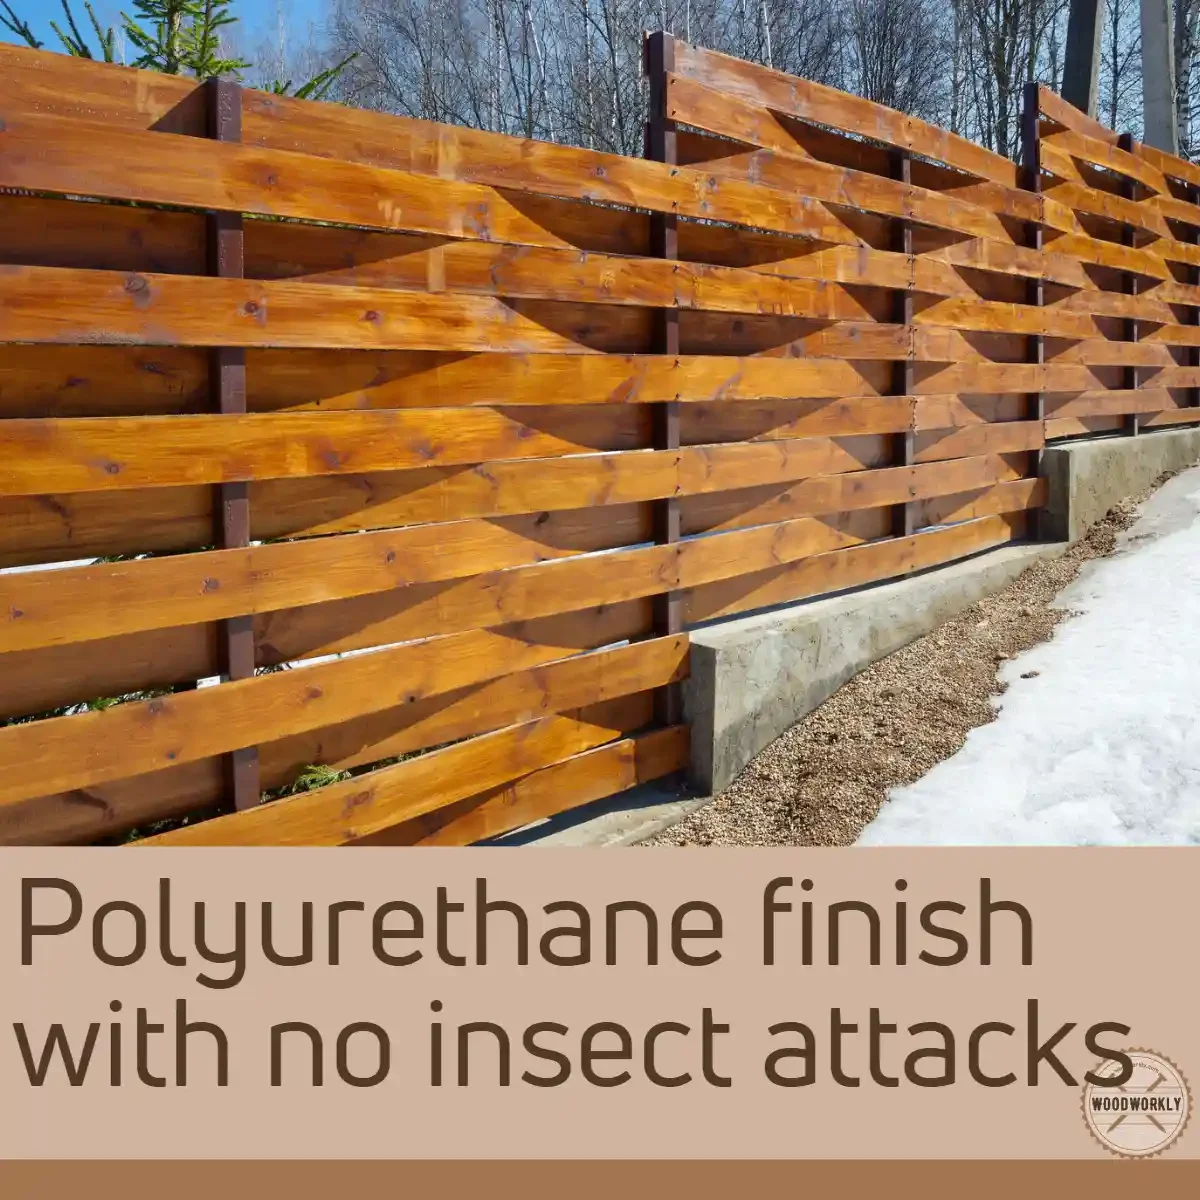 Polyurethane finish with no insect attacks